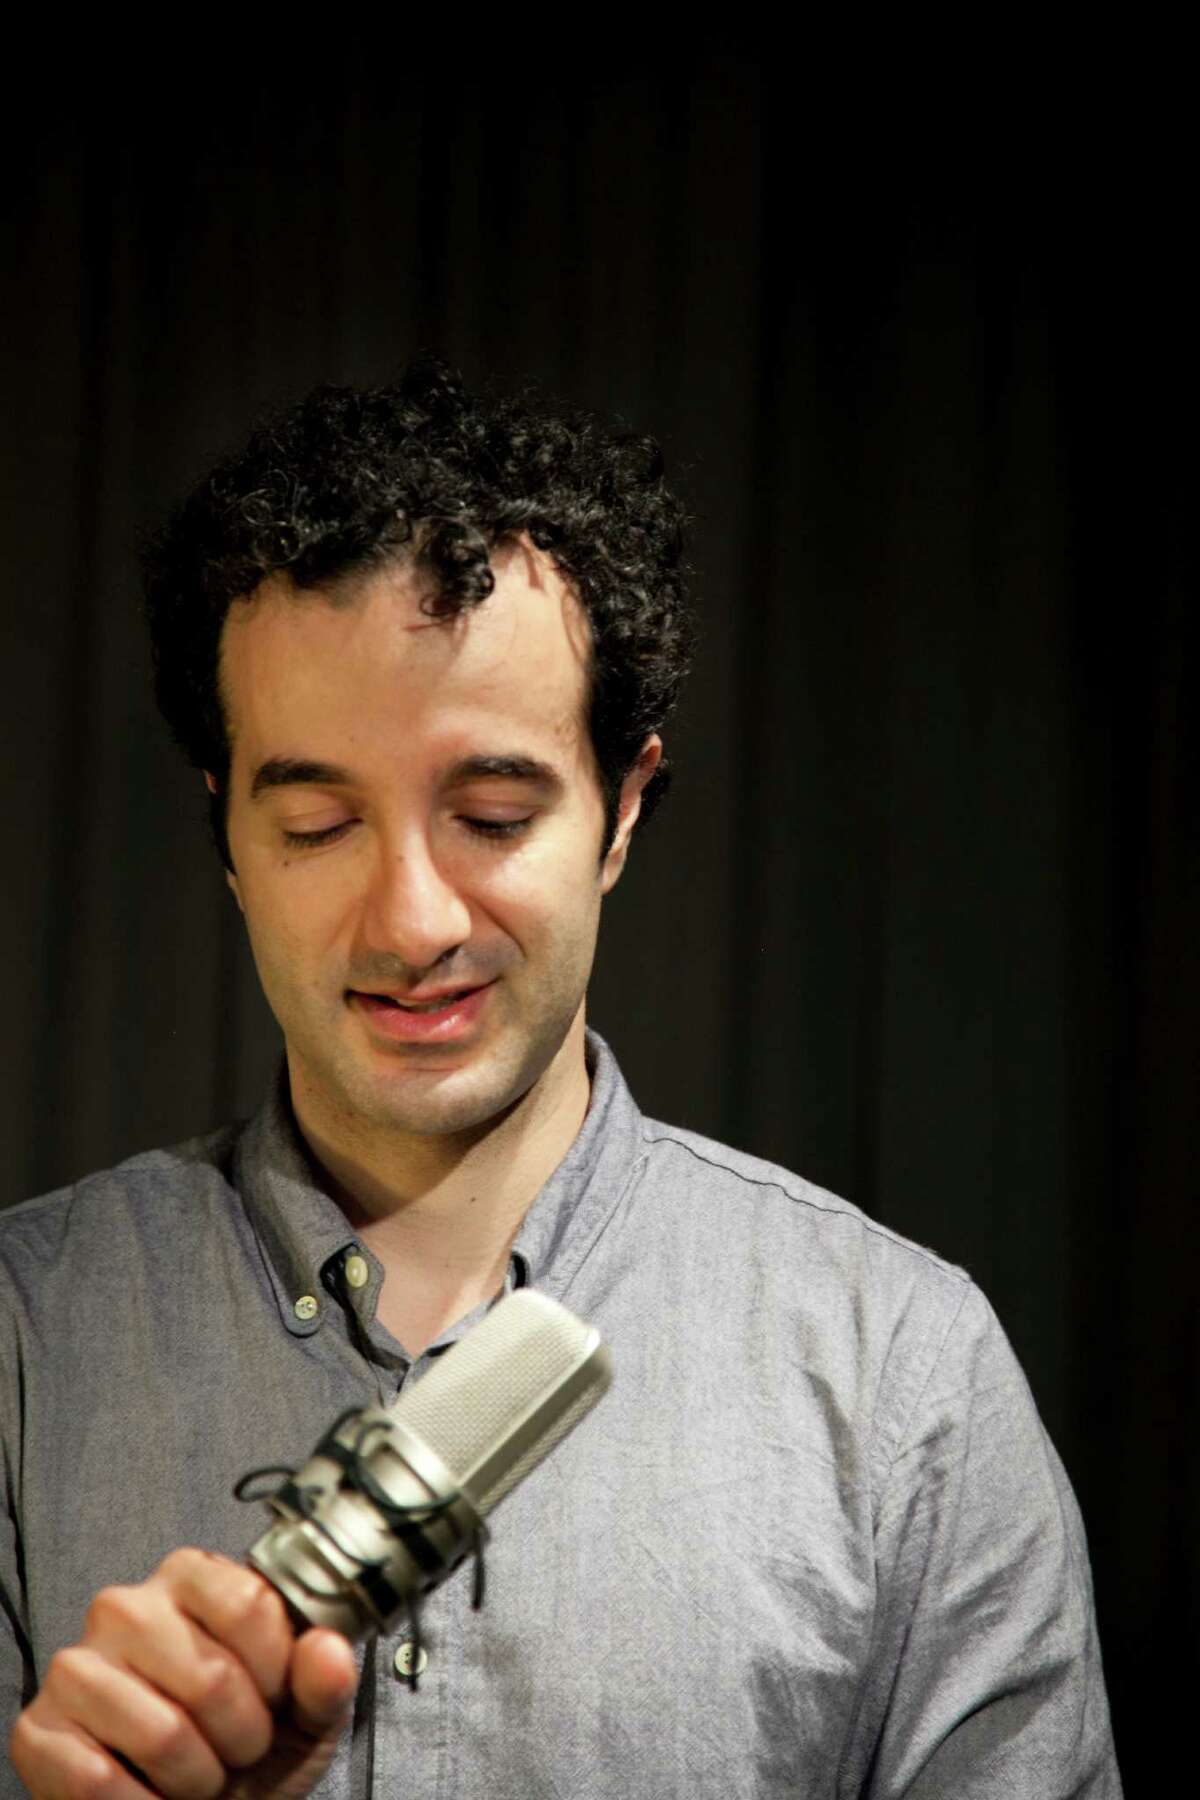 NPR's Jad Abumrad brings his creative fears center stage